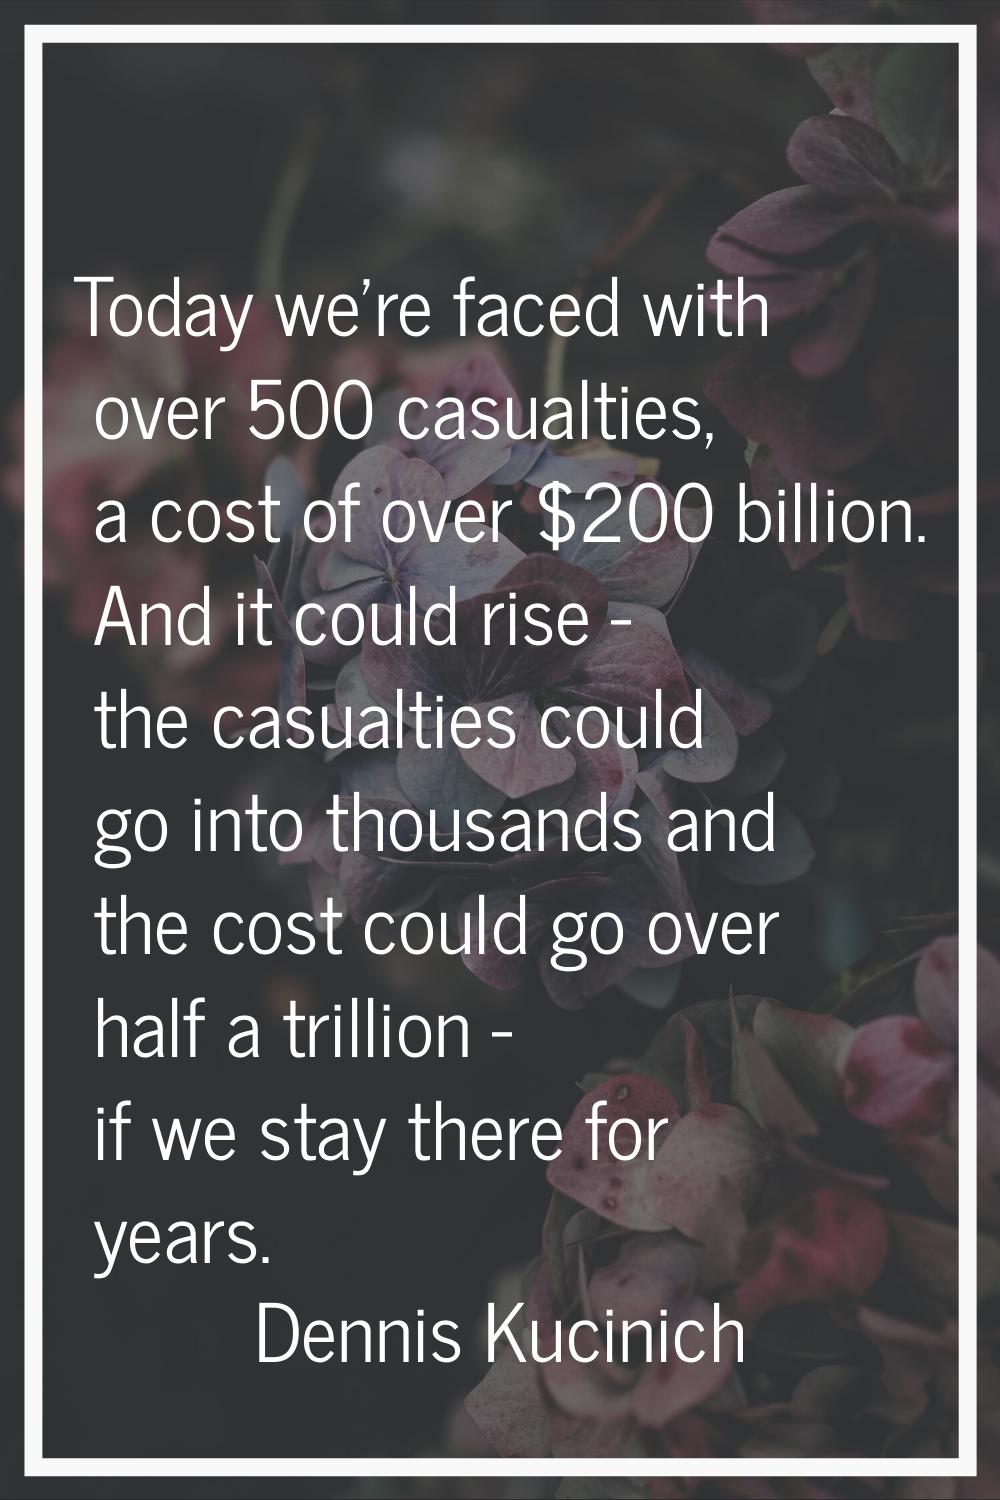 Today we're faced with over 500 casualties, a cost of over $200 billion. And it could rise - the ca